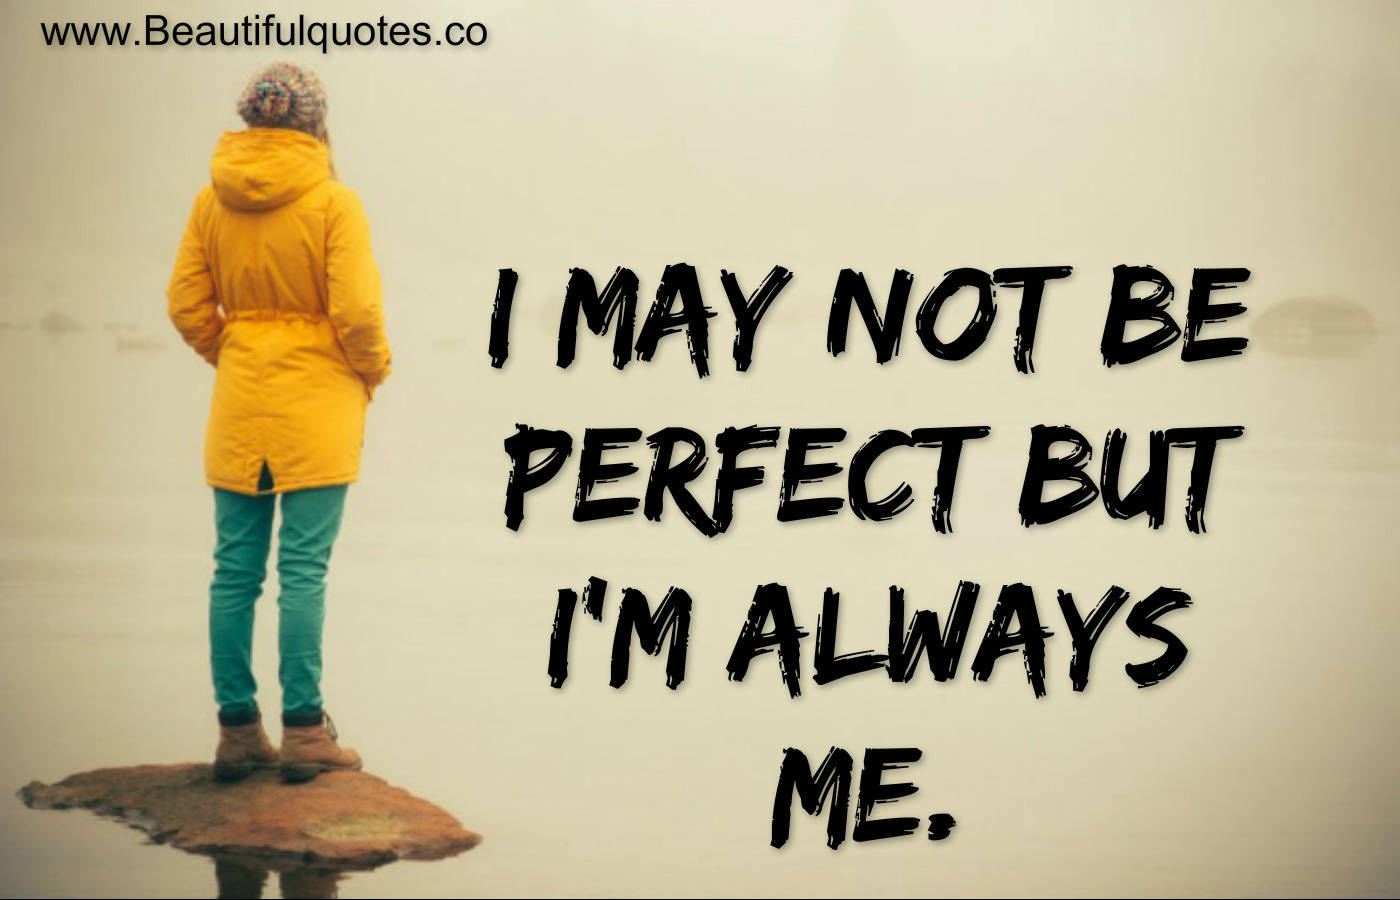 I may not be perfect but I'm always me.